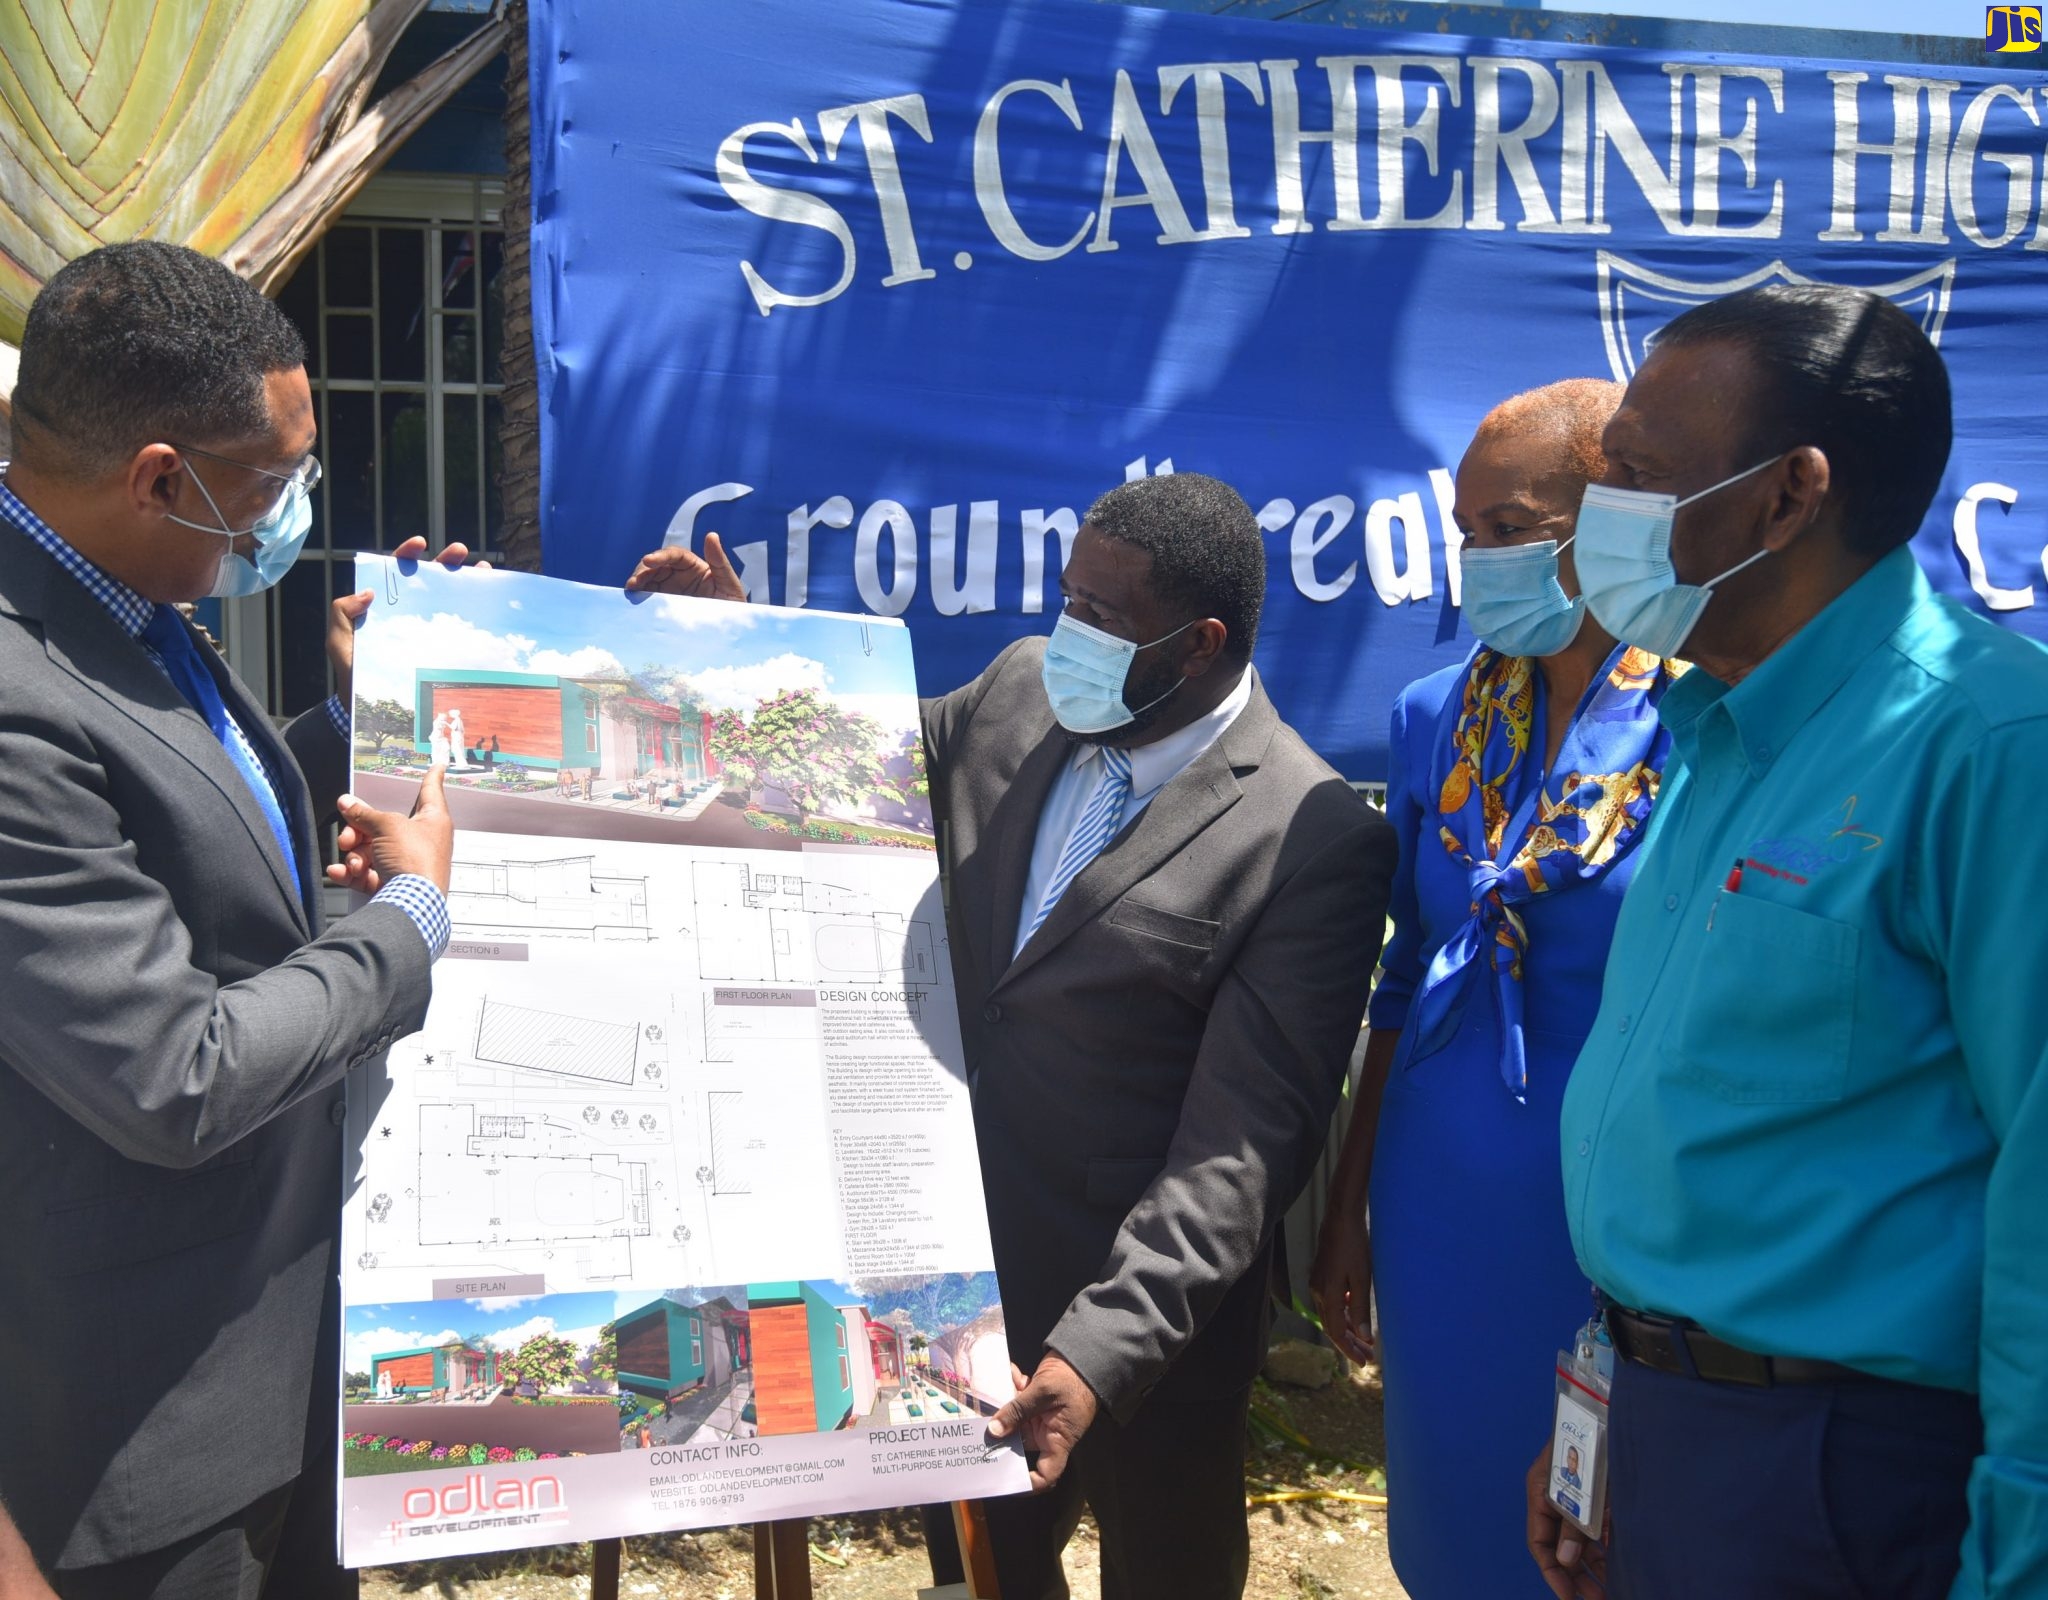 New Performing Arts Centre for St. Catherine High